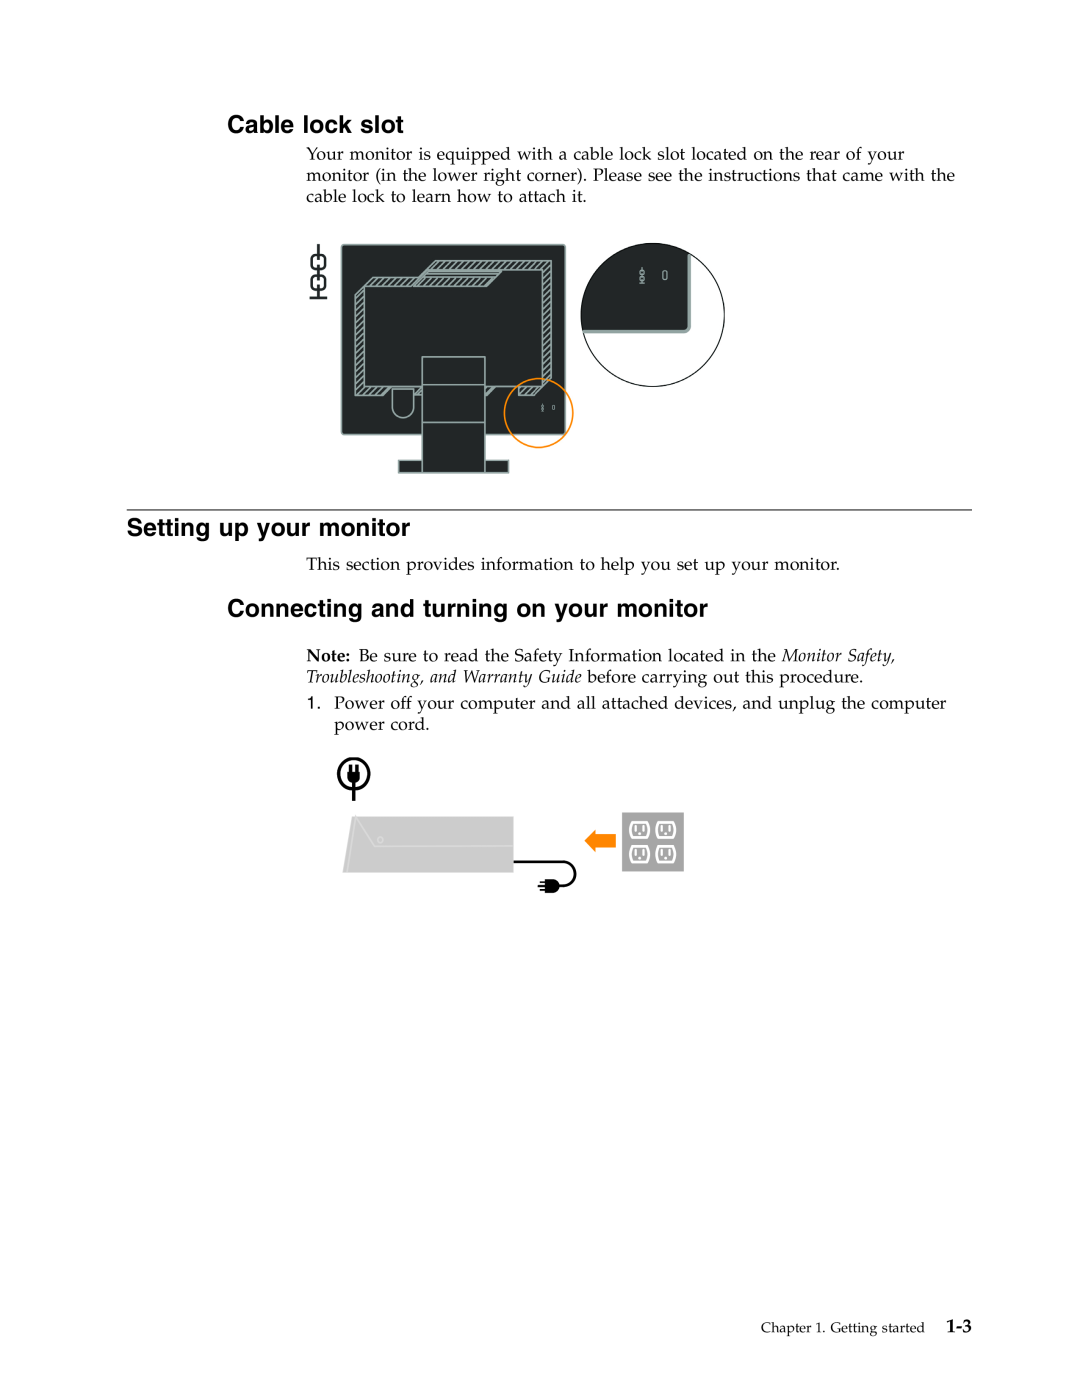 Lenovo L191 manual Cable lock slot, Setting up your monitor, Connecting and turning on your monitor, Getting started 